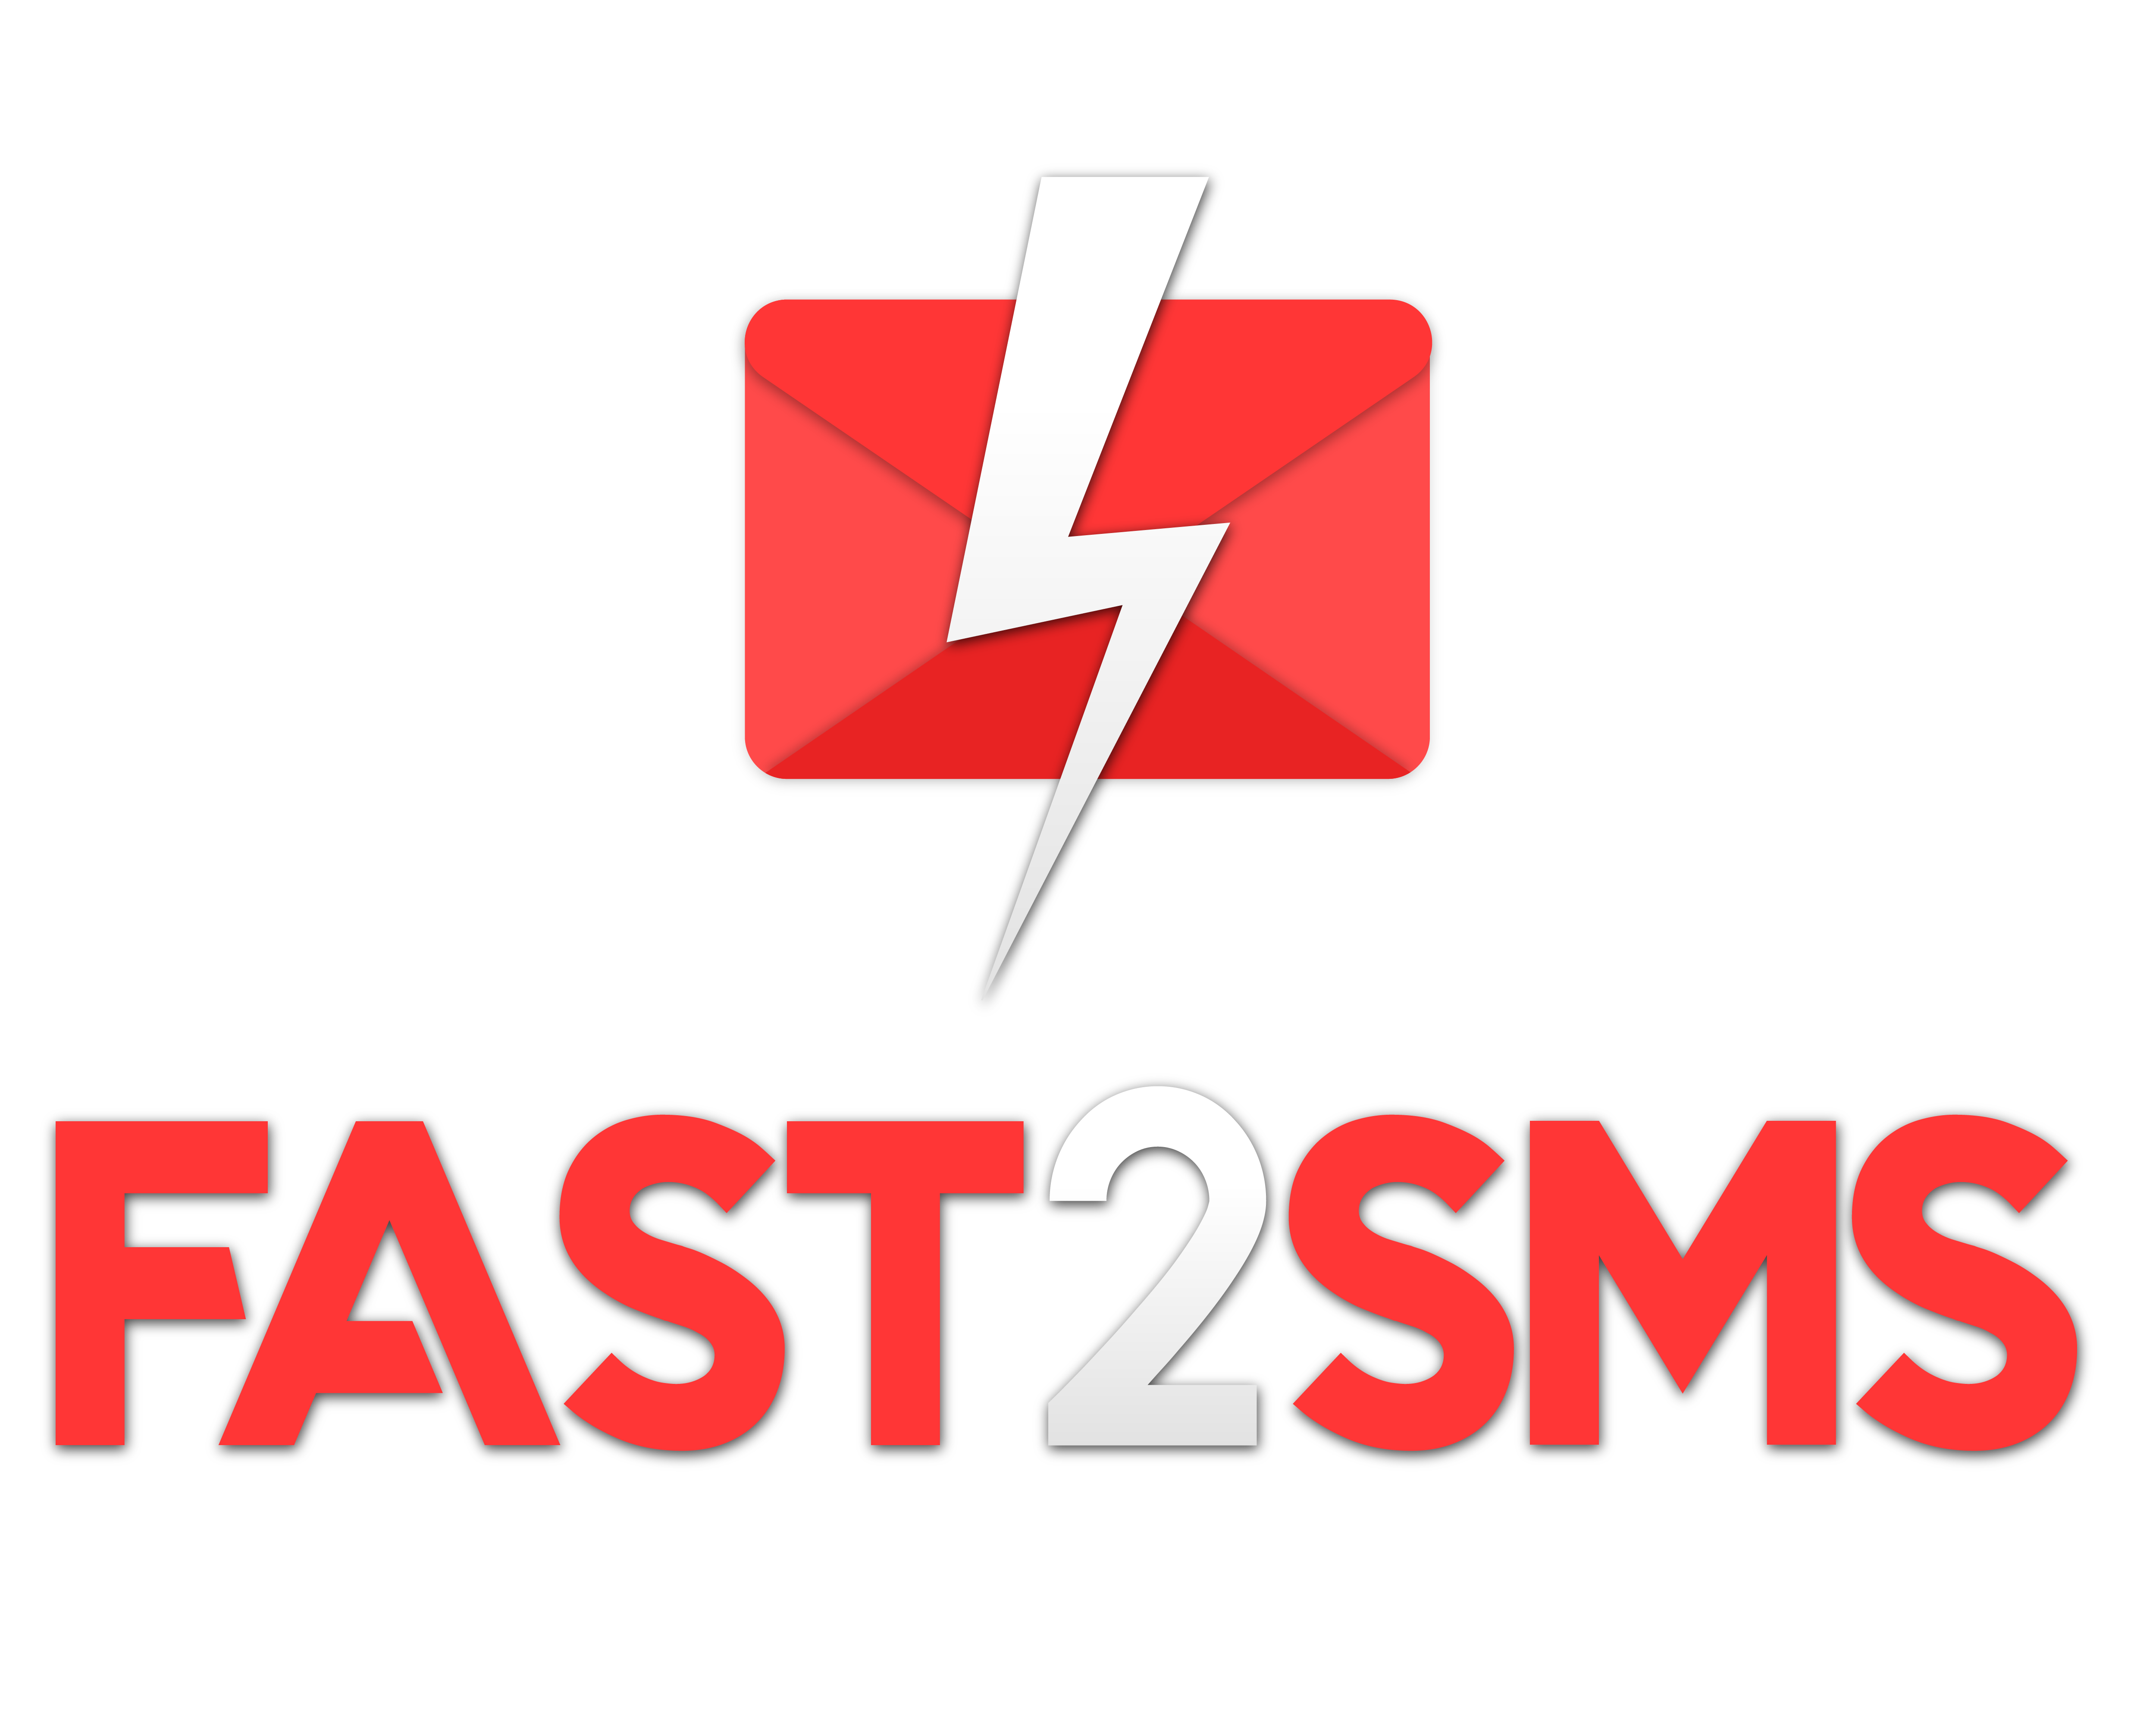 Fast2sms